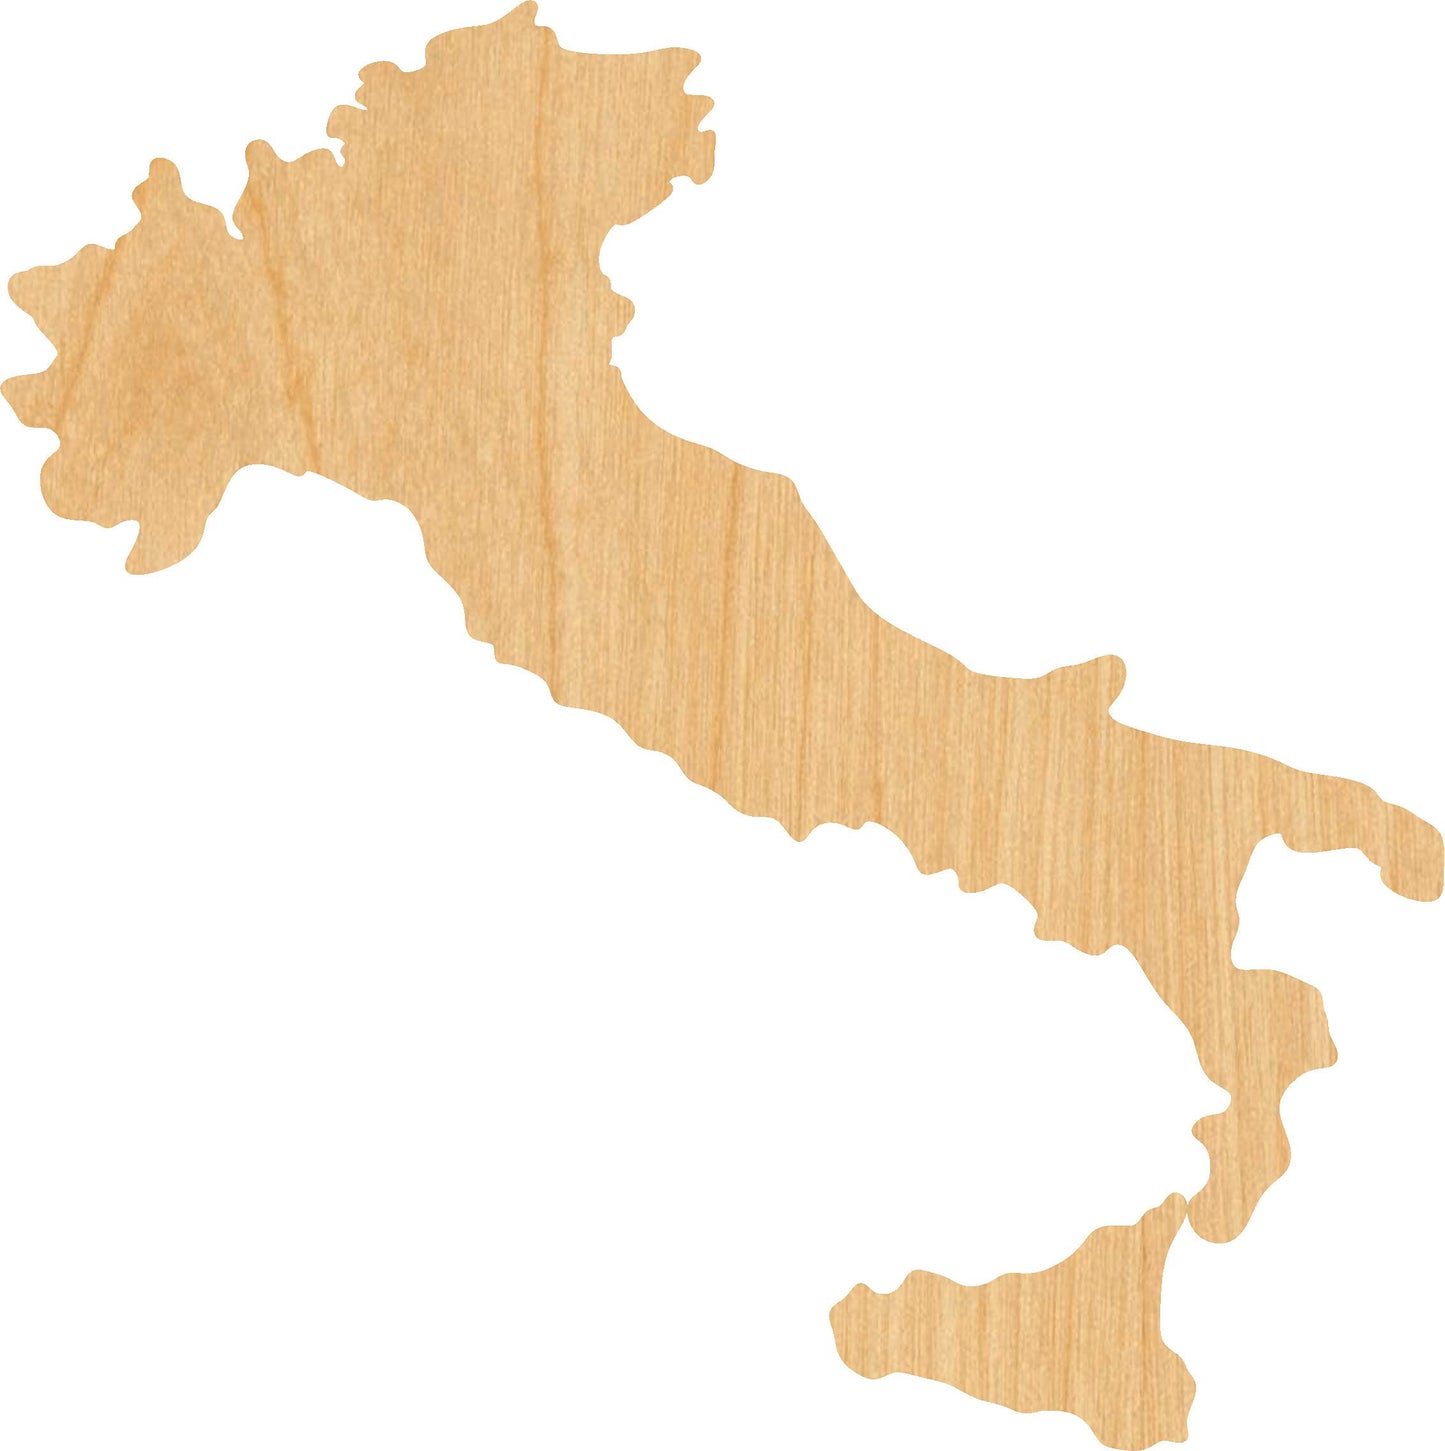 Italy Laser Cut Out Wood Shape Craft Supply - 4 Inch